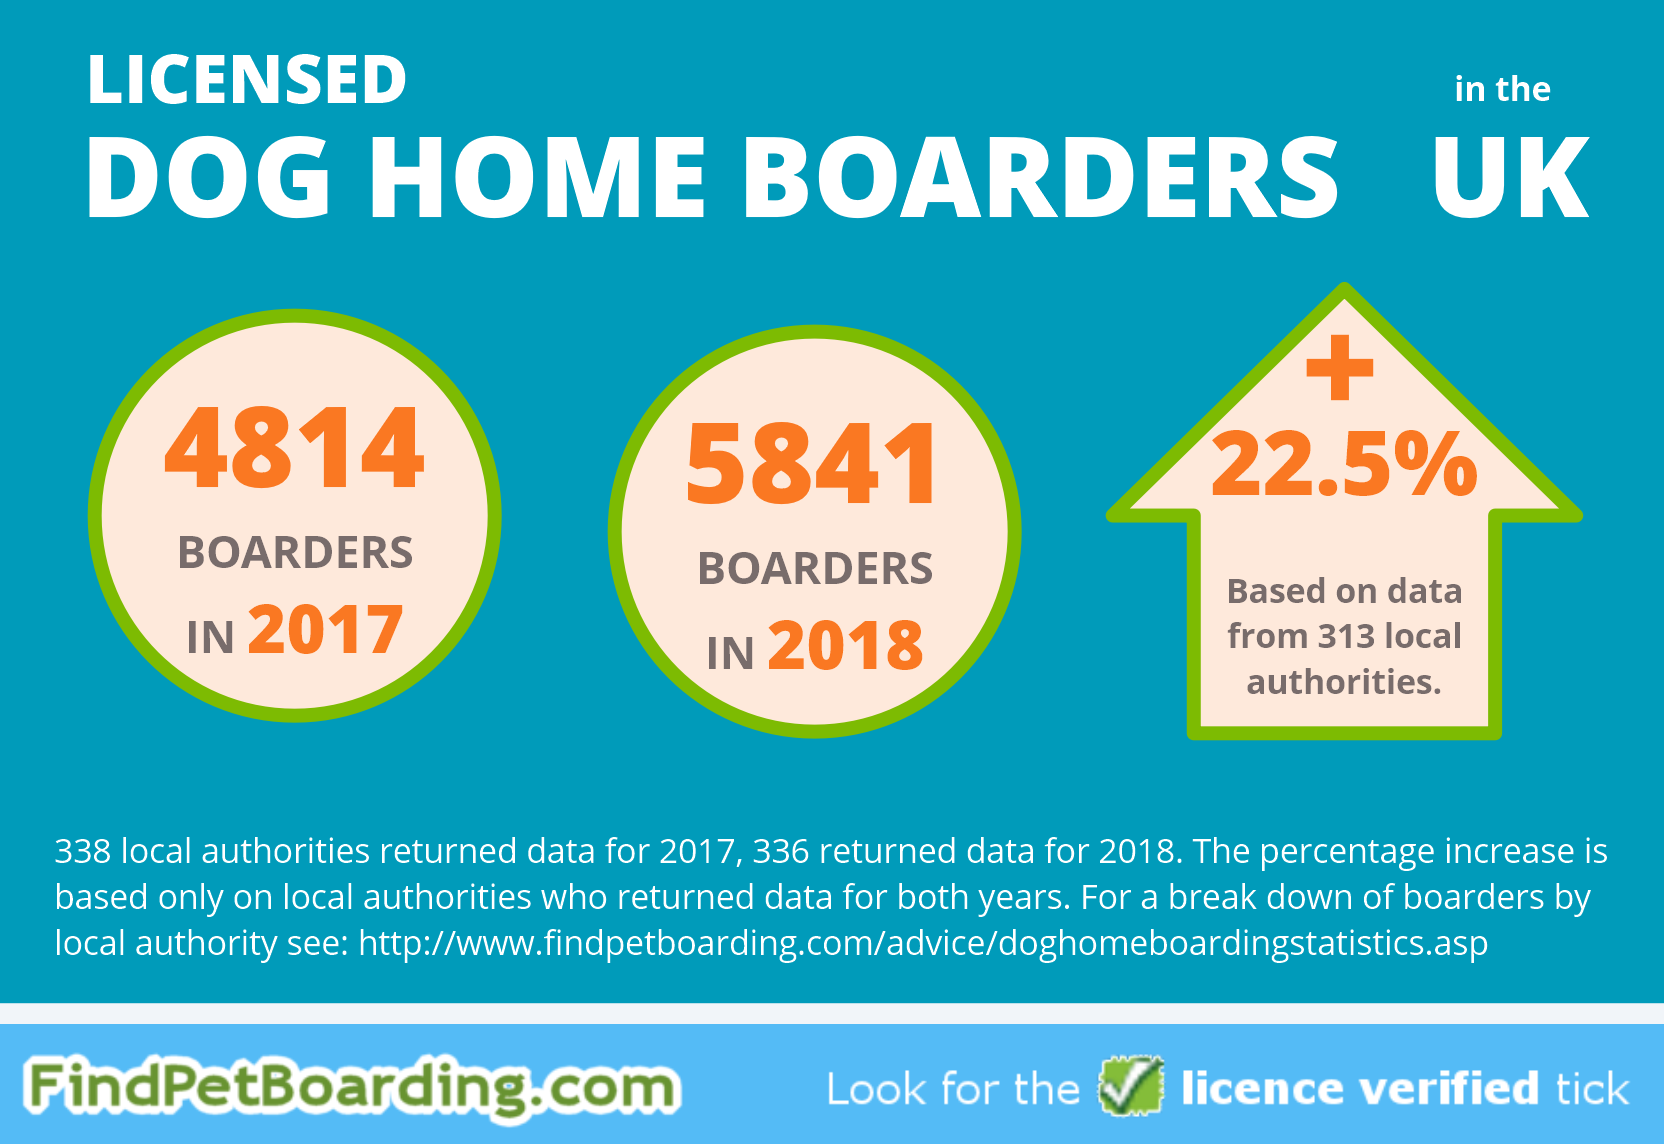 Number of dog home boarders in the UK